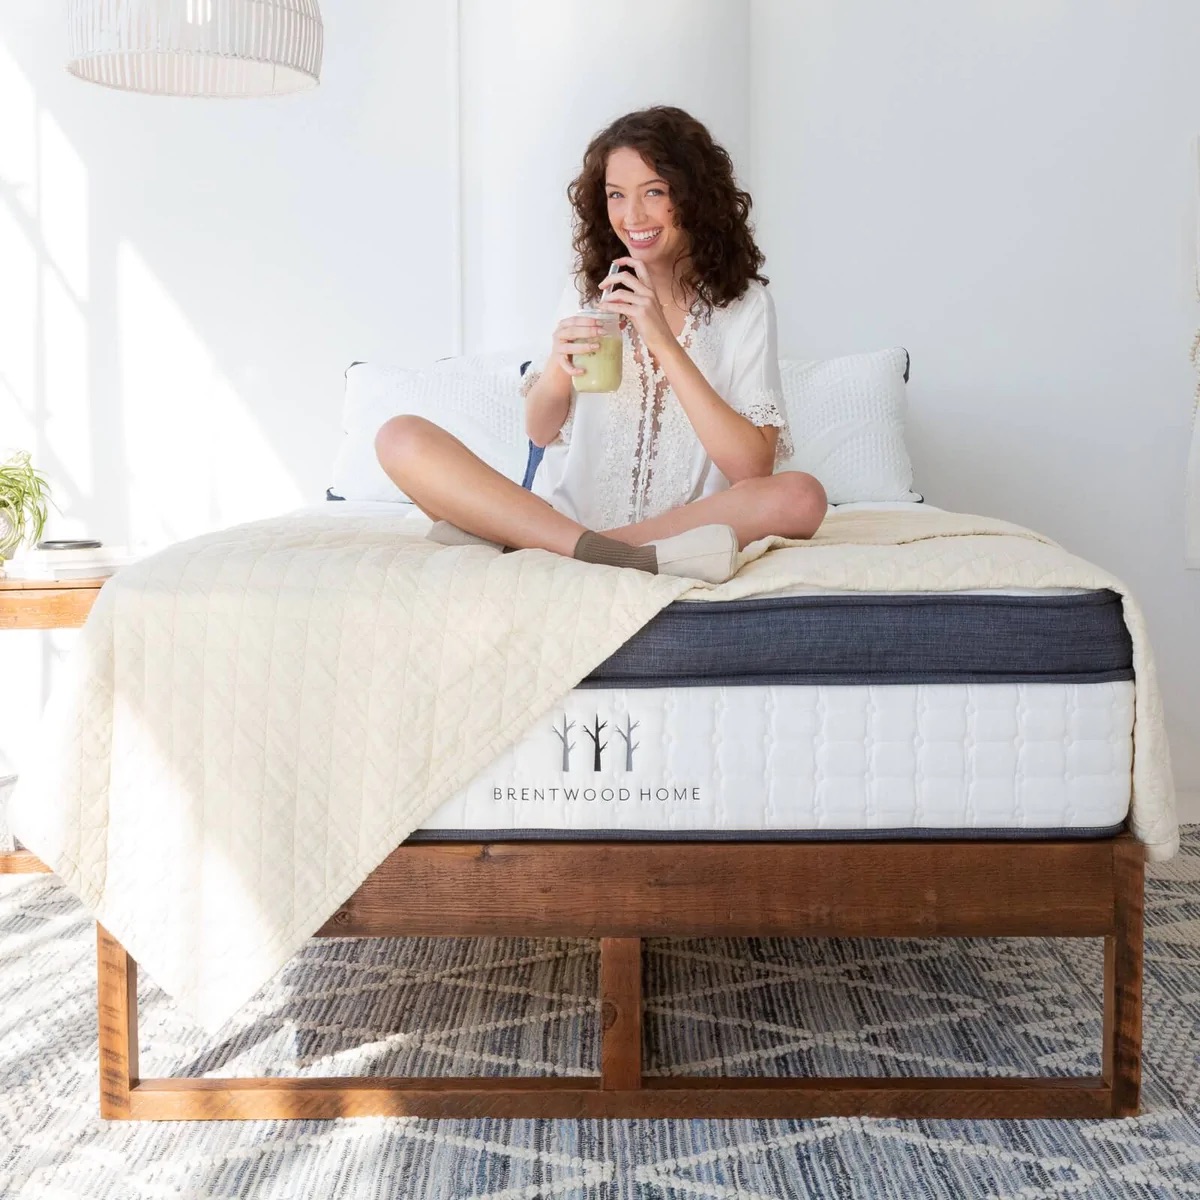 A woman smiles and drinks a smoothie while sitting on top of a mattress from Brentwood Home, the logo is clearly visible